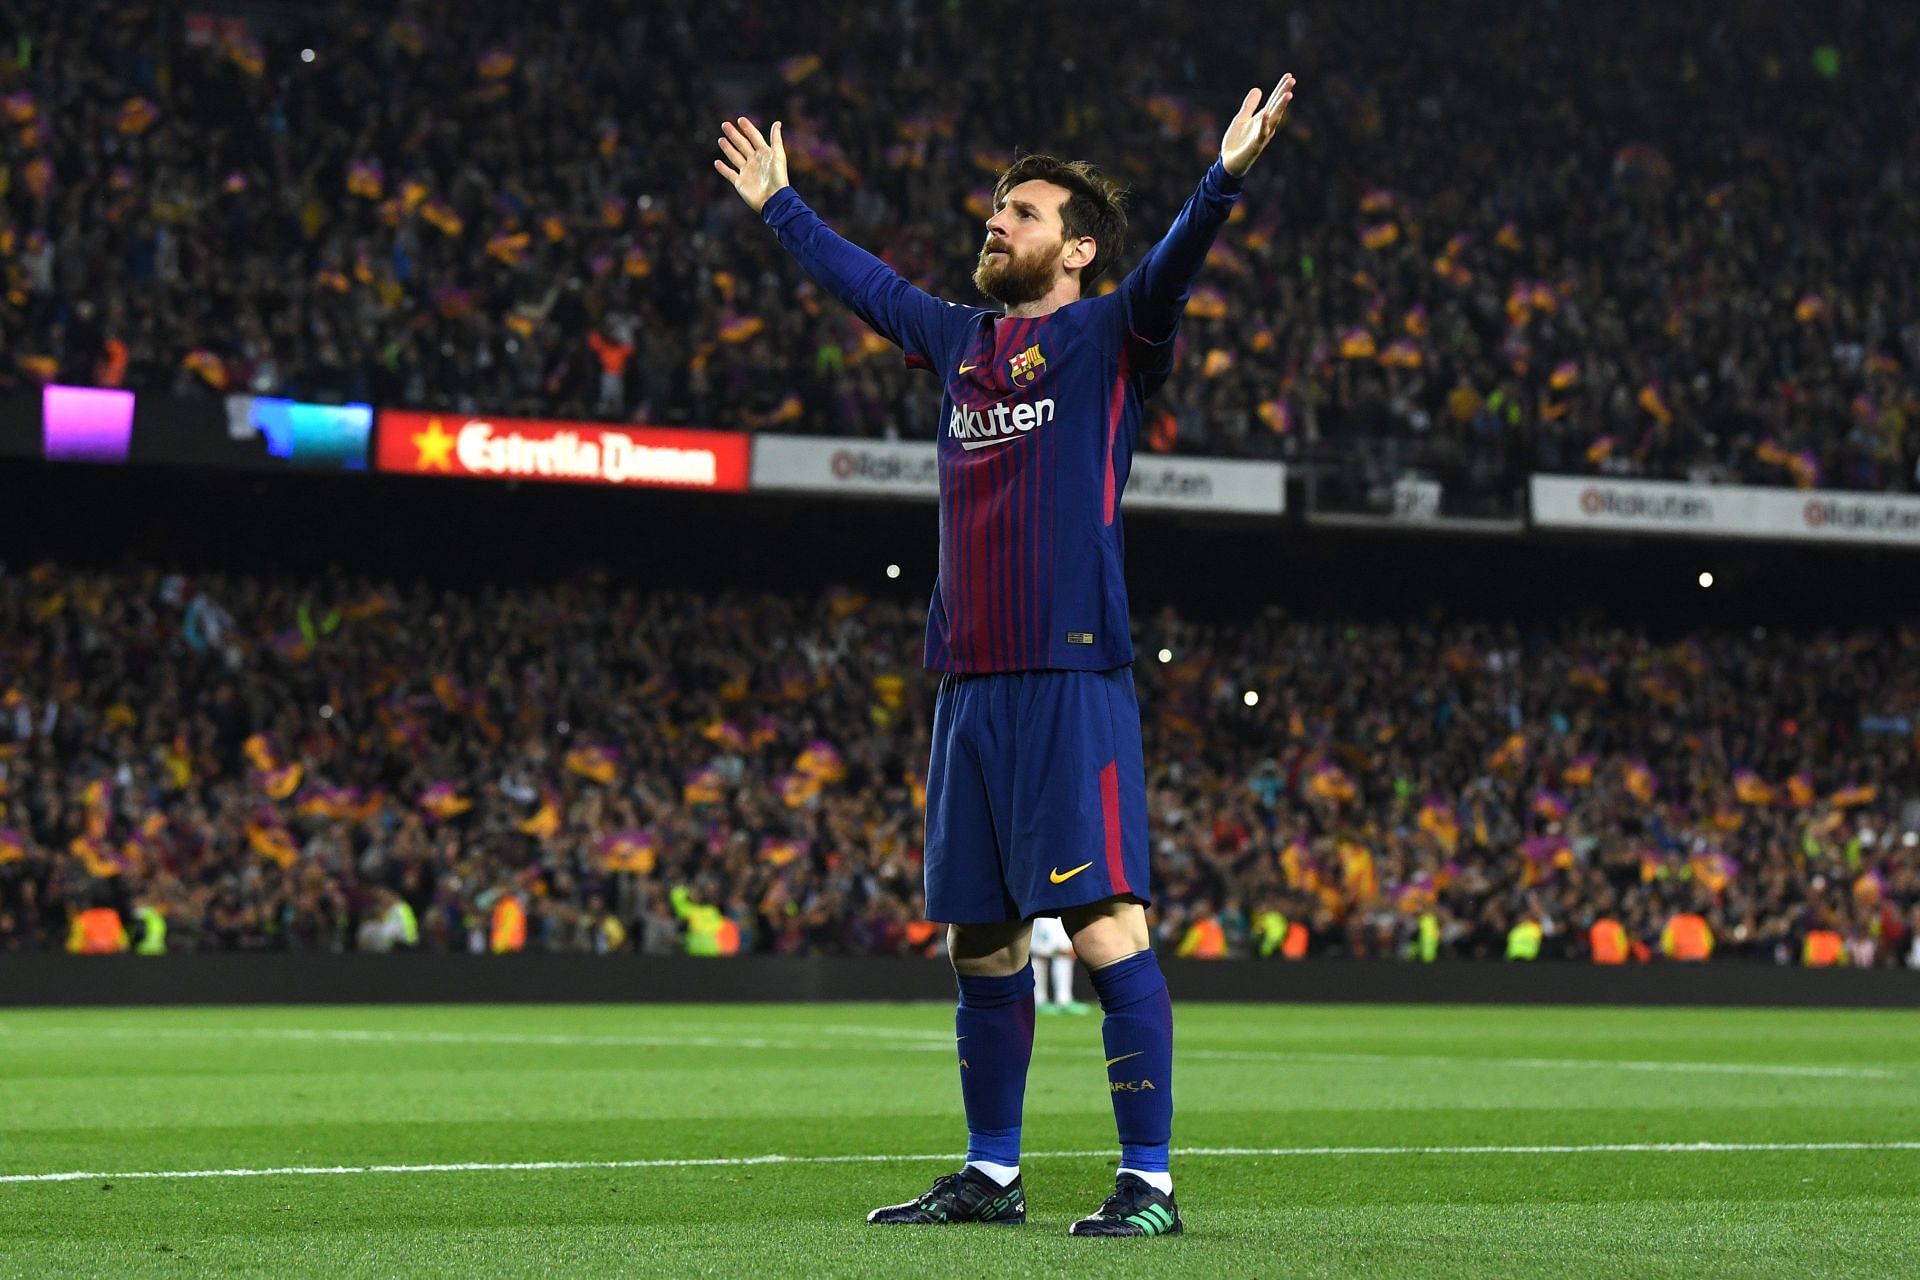 Lionel Andres Messi - The greatest footballer of all-time, no debate.